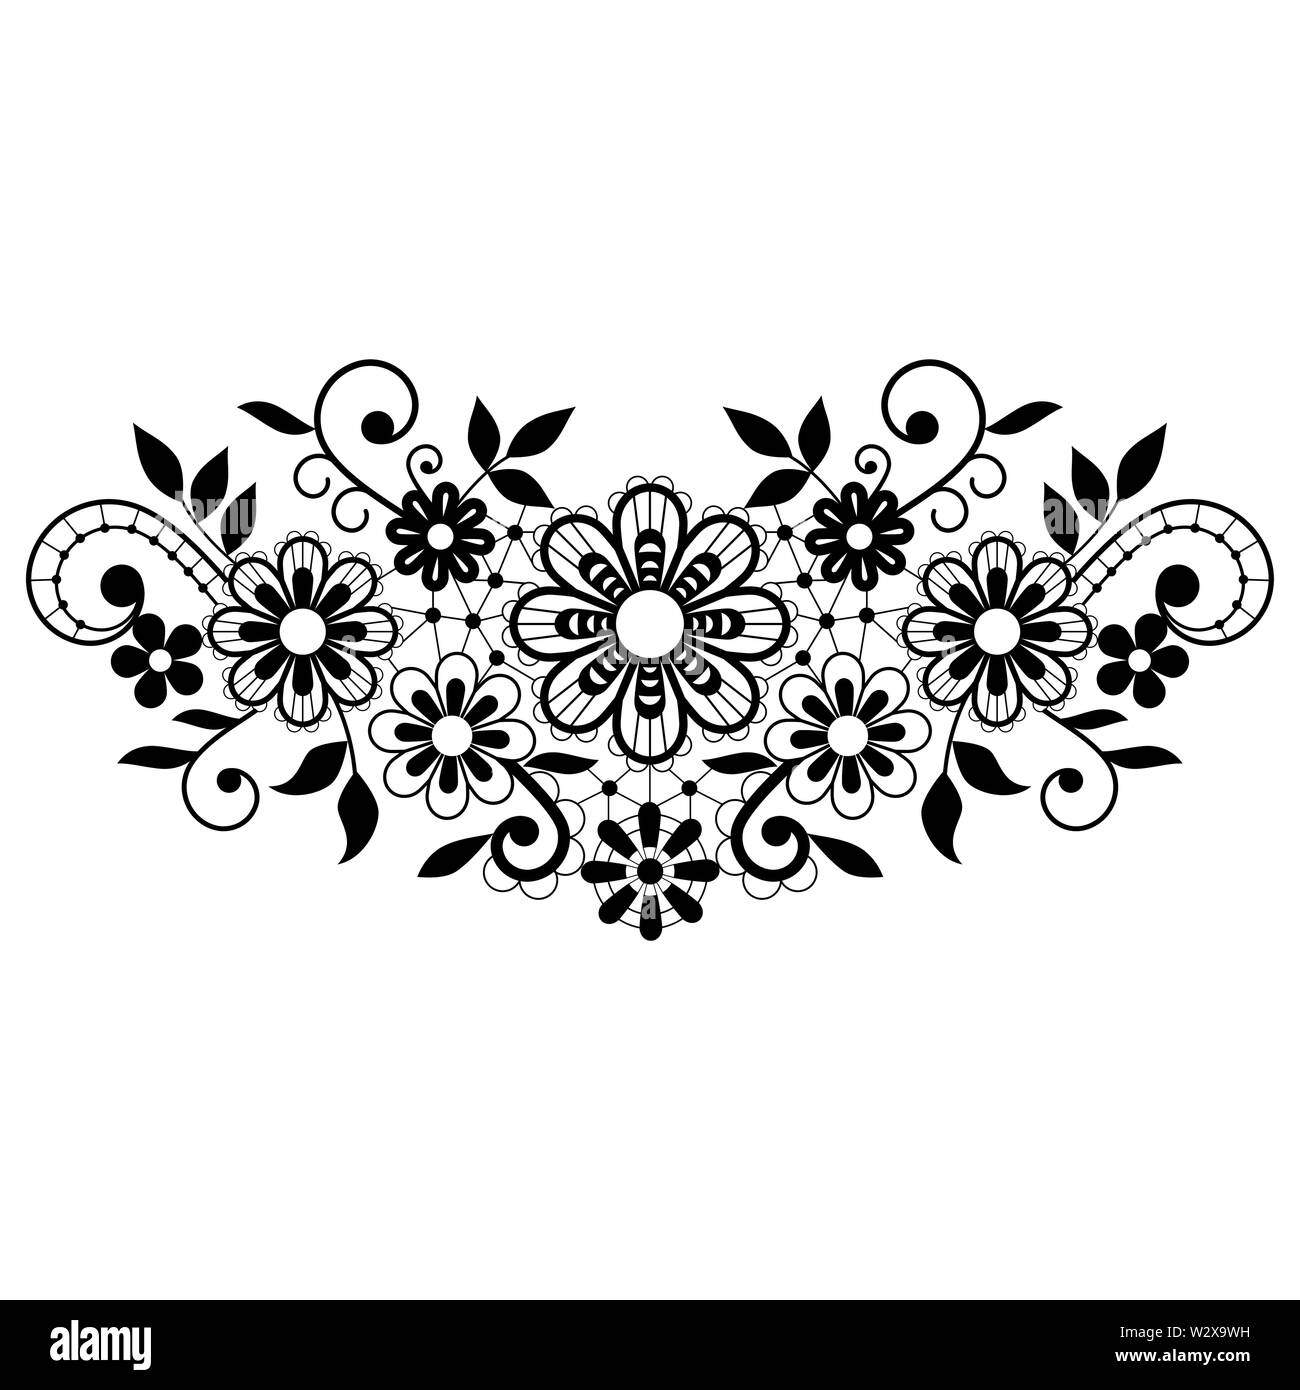 Retro black lace vector single design, ornamental pattern with flowers and swirls, detailed lace motif Stock Vector